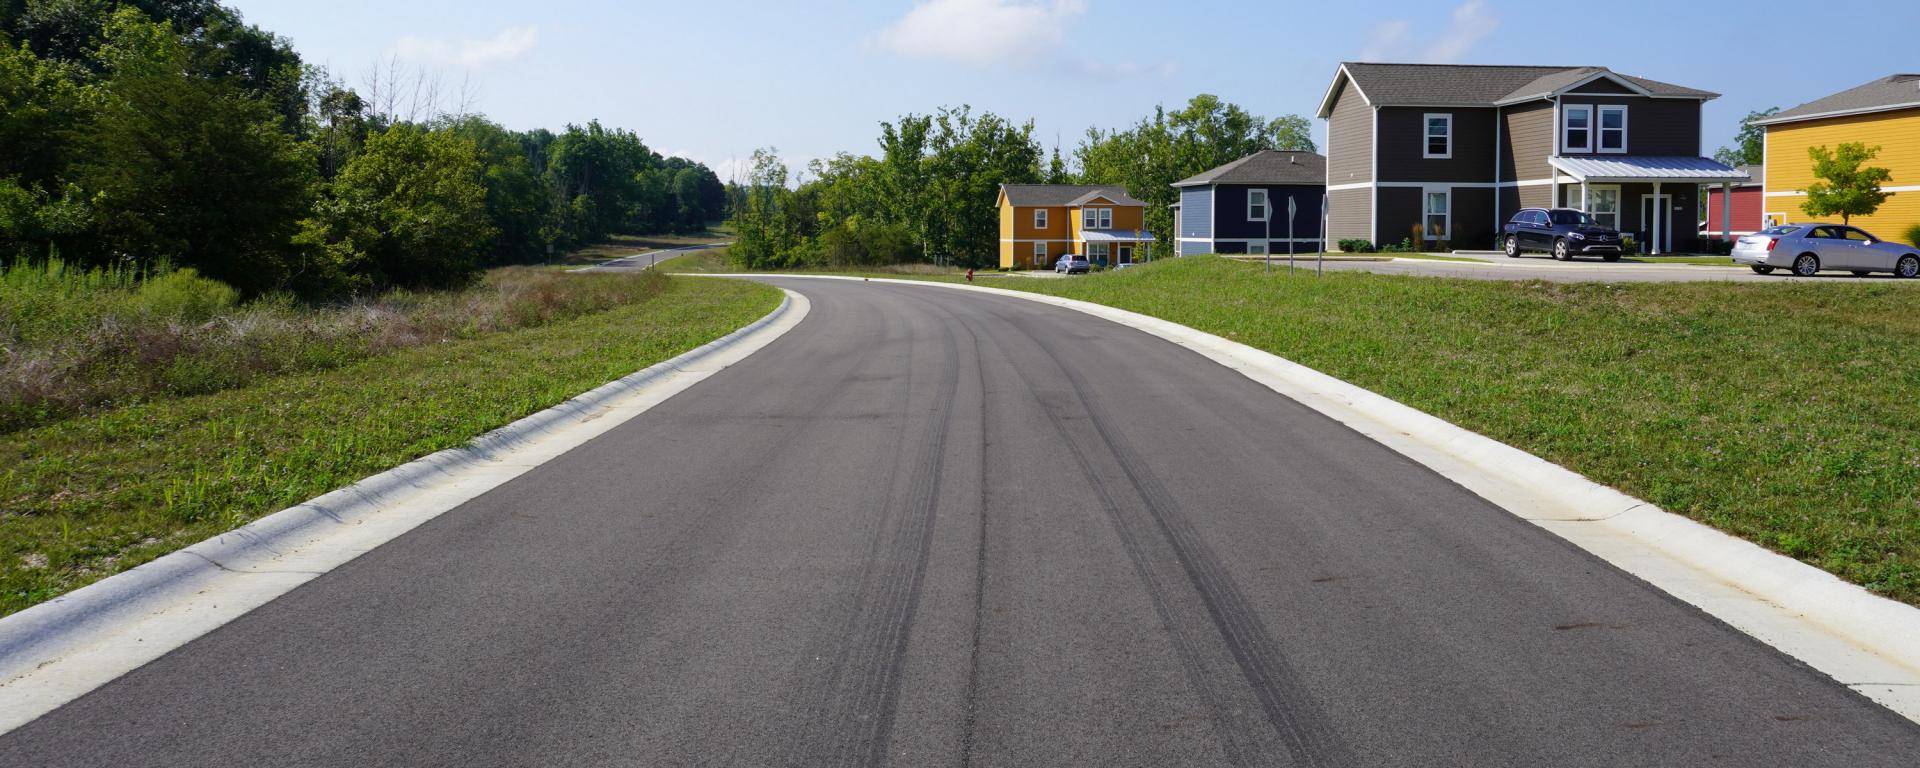 newly paved roadway with houses on one side